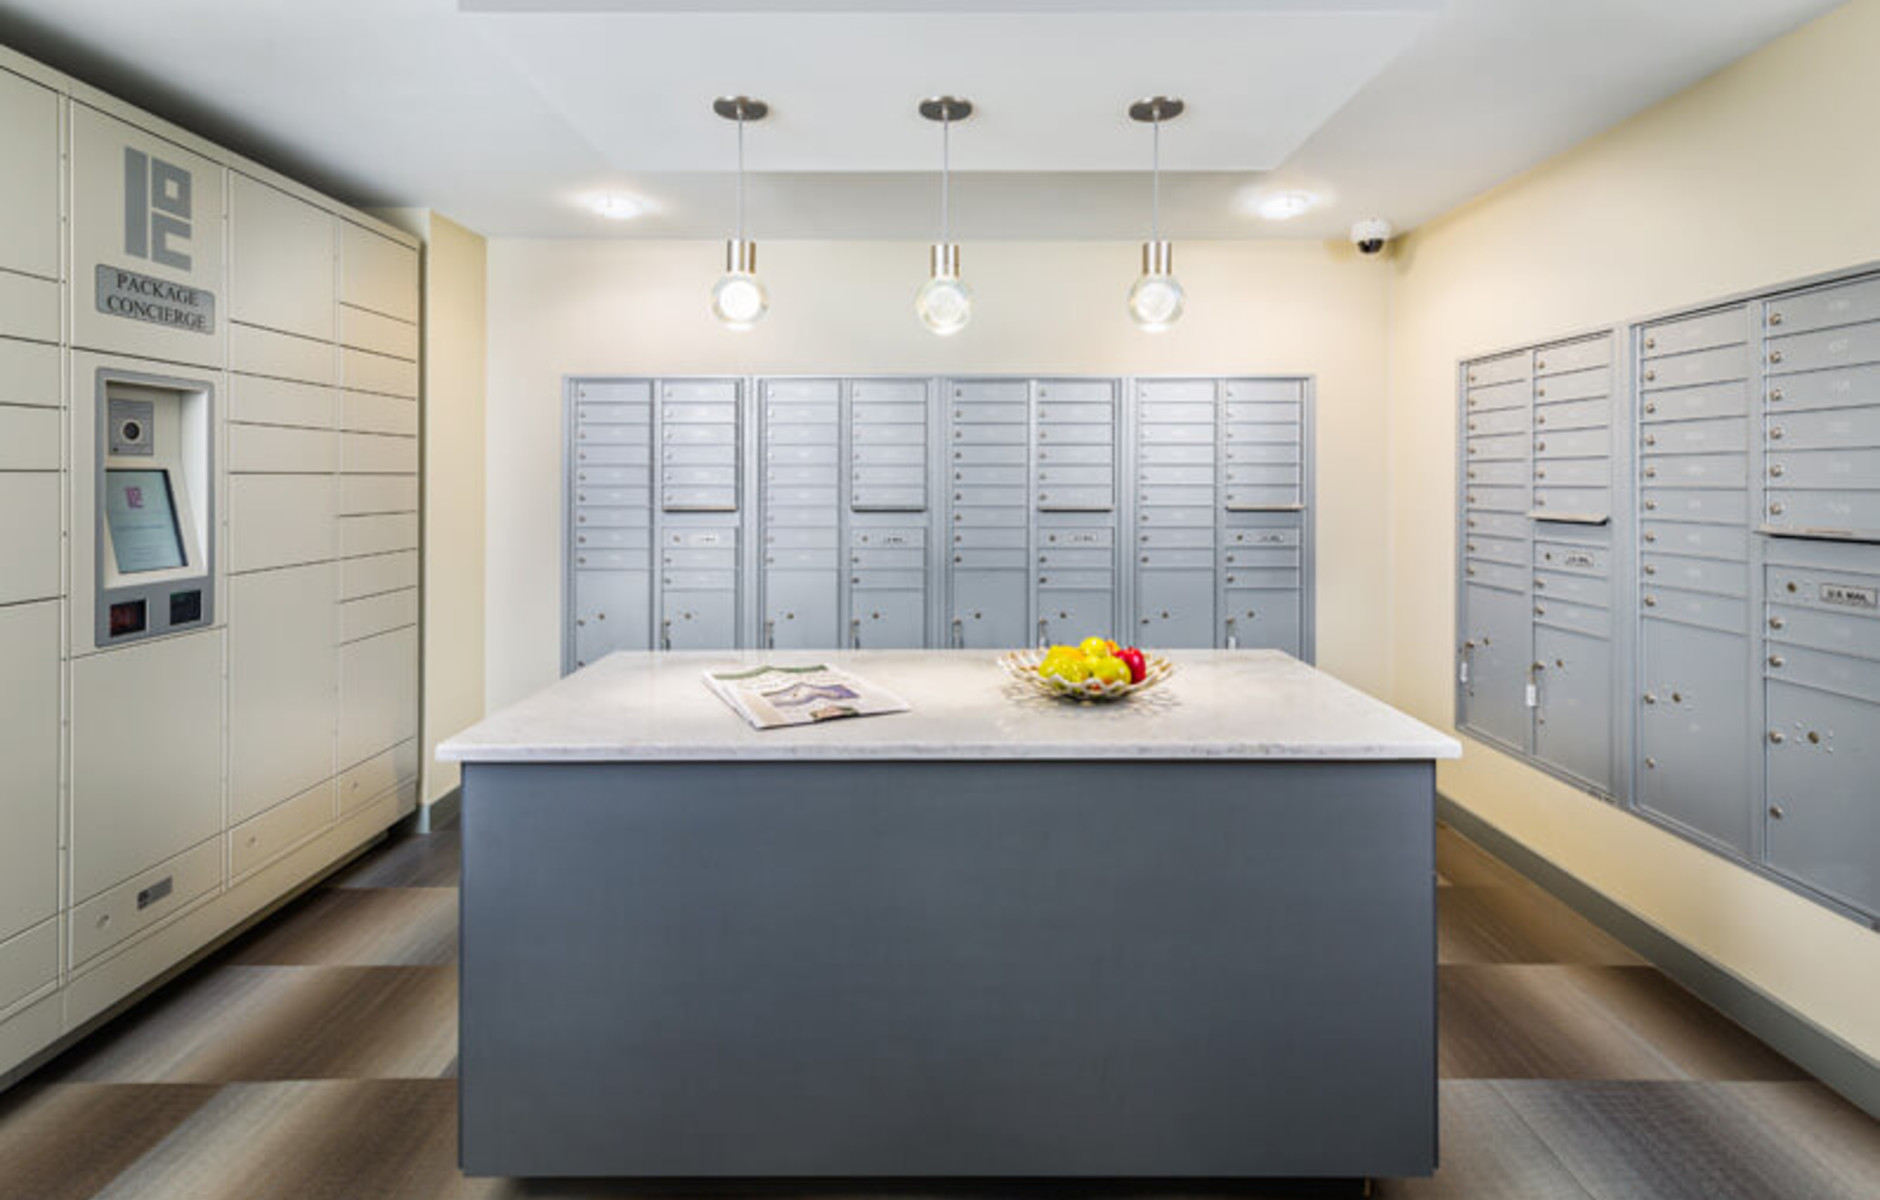 Mail room with secure package lockers